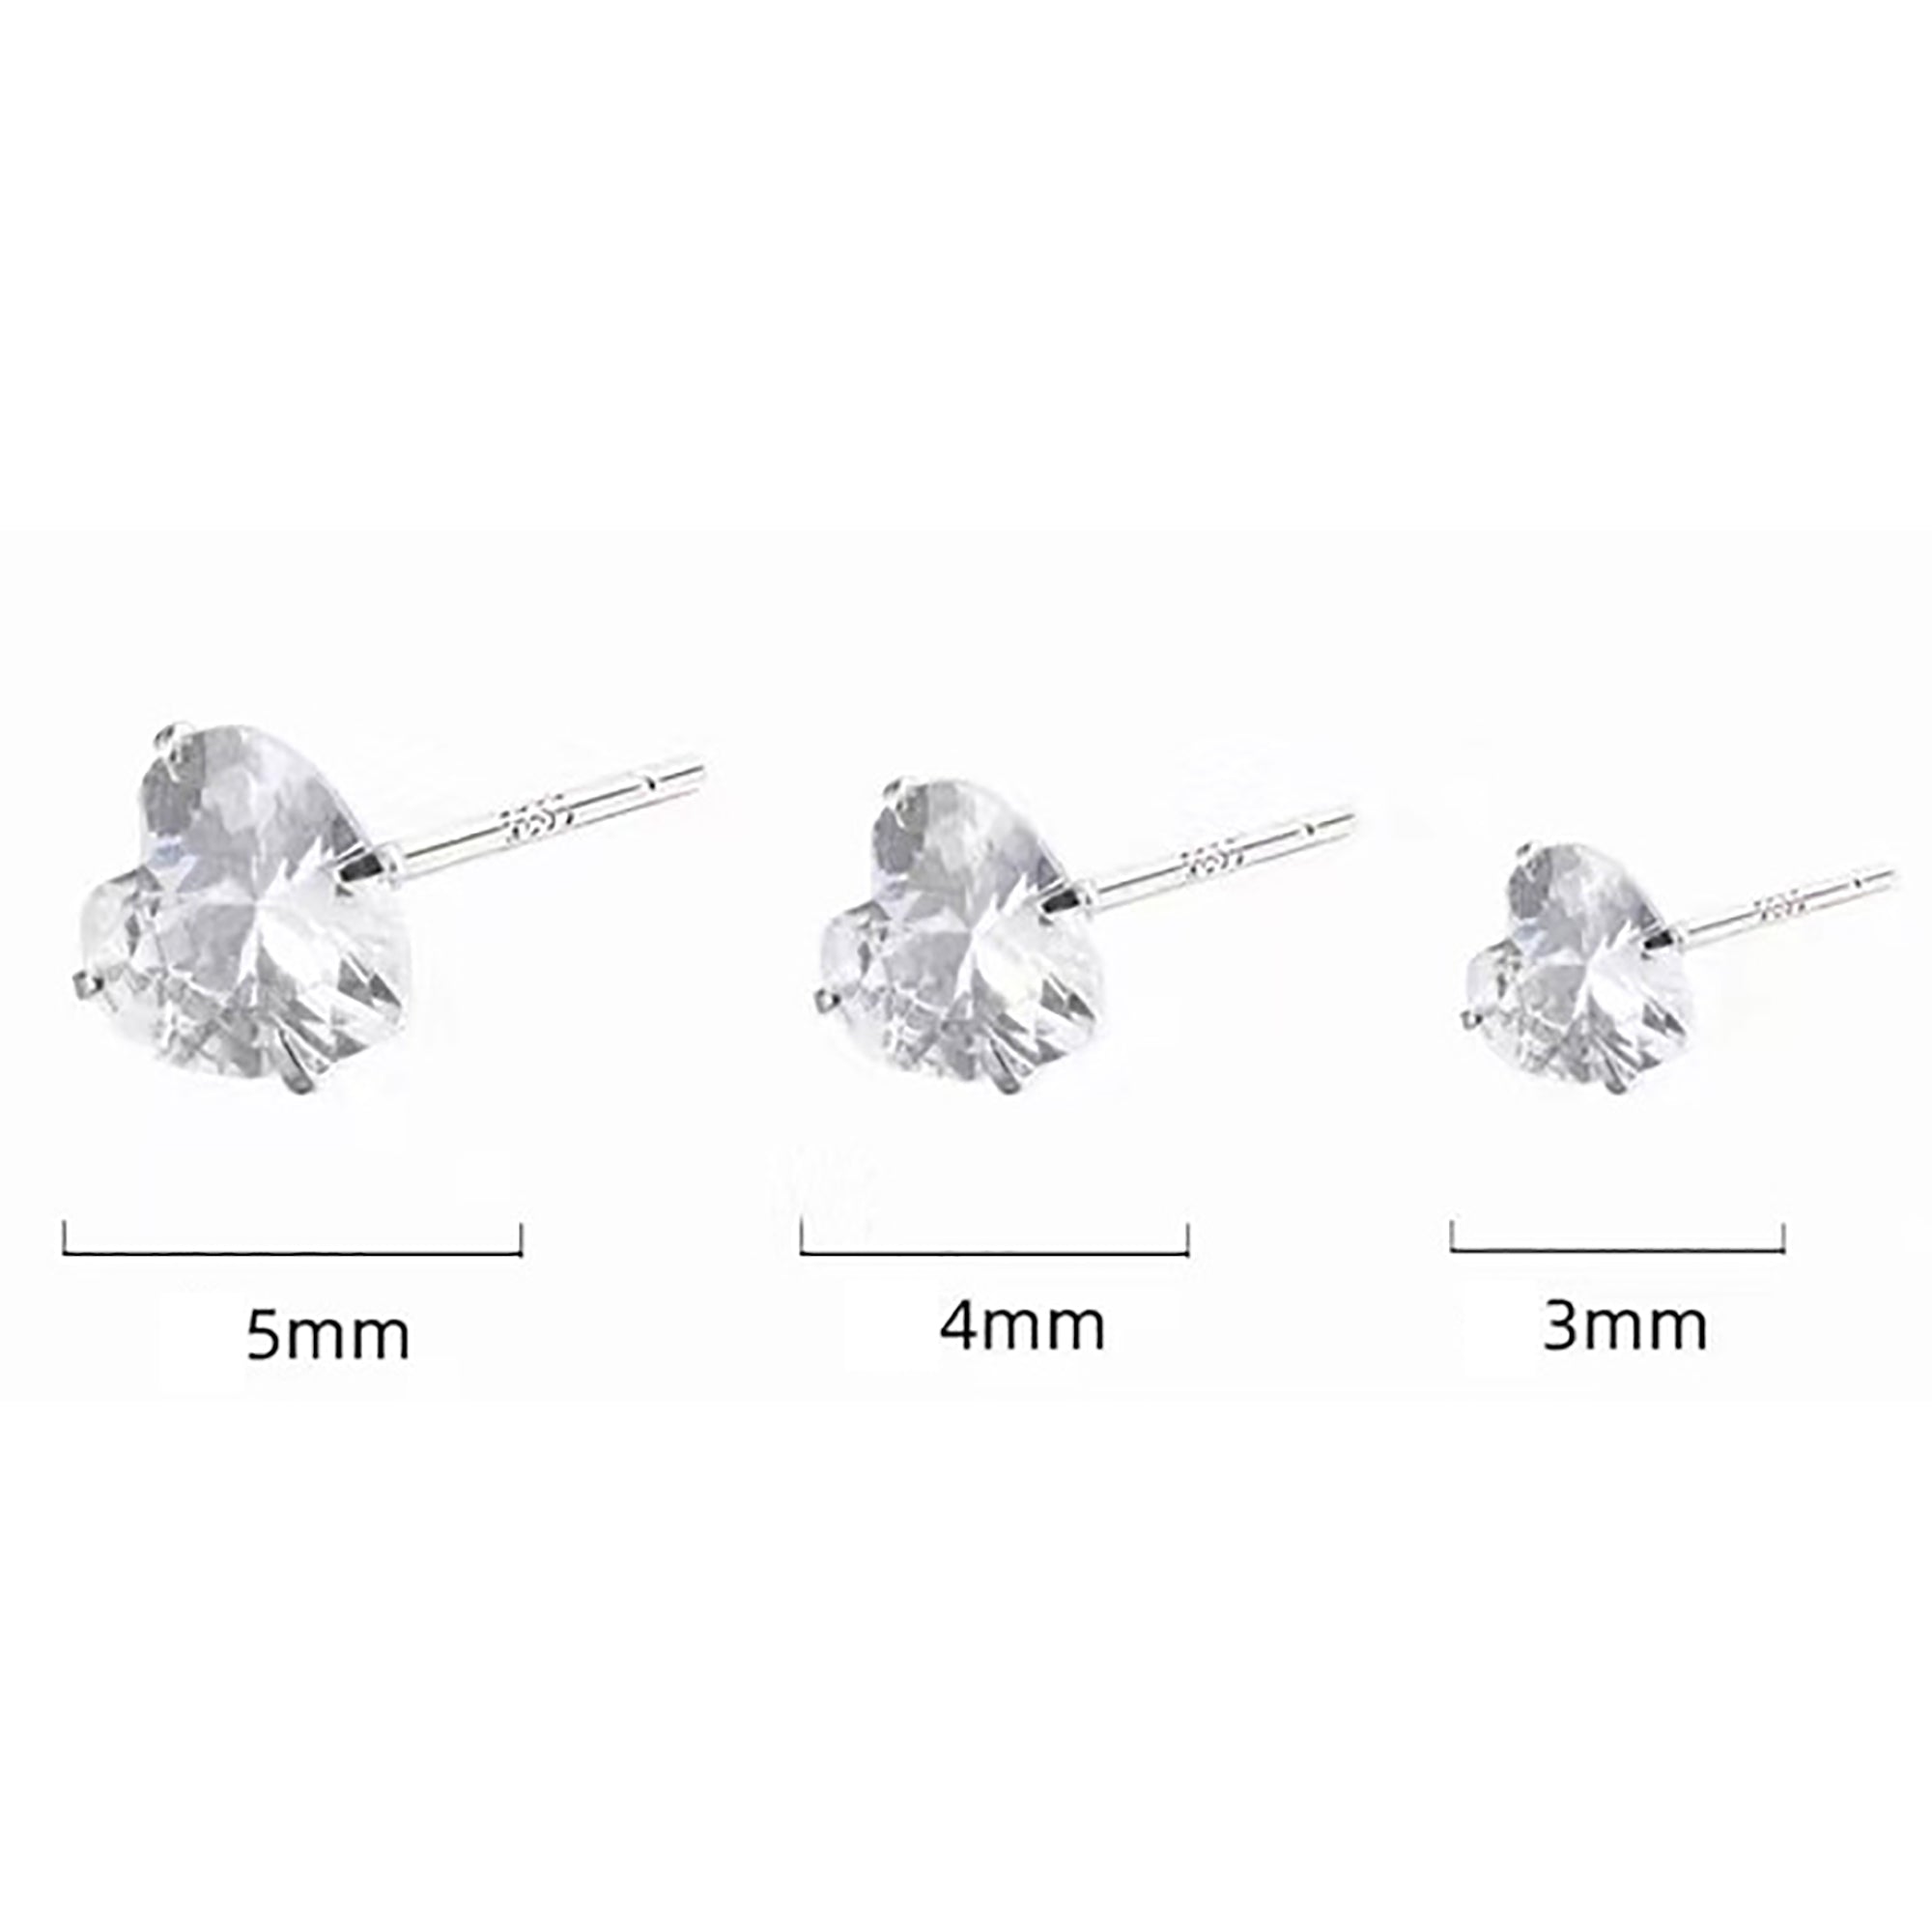 (3 / 4 / 5 mm) 925 Sterling Silver CZ Heart Stud Earrings Gift Party wedding influencer styling KOL / Youtuber / Celebrity / Fashion Icon